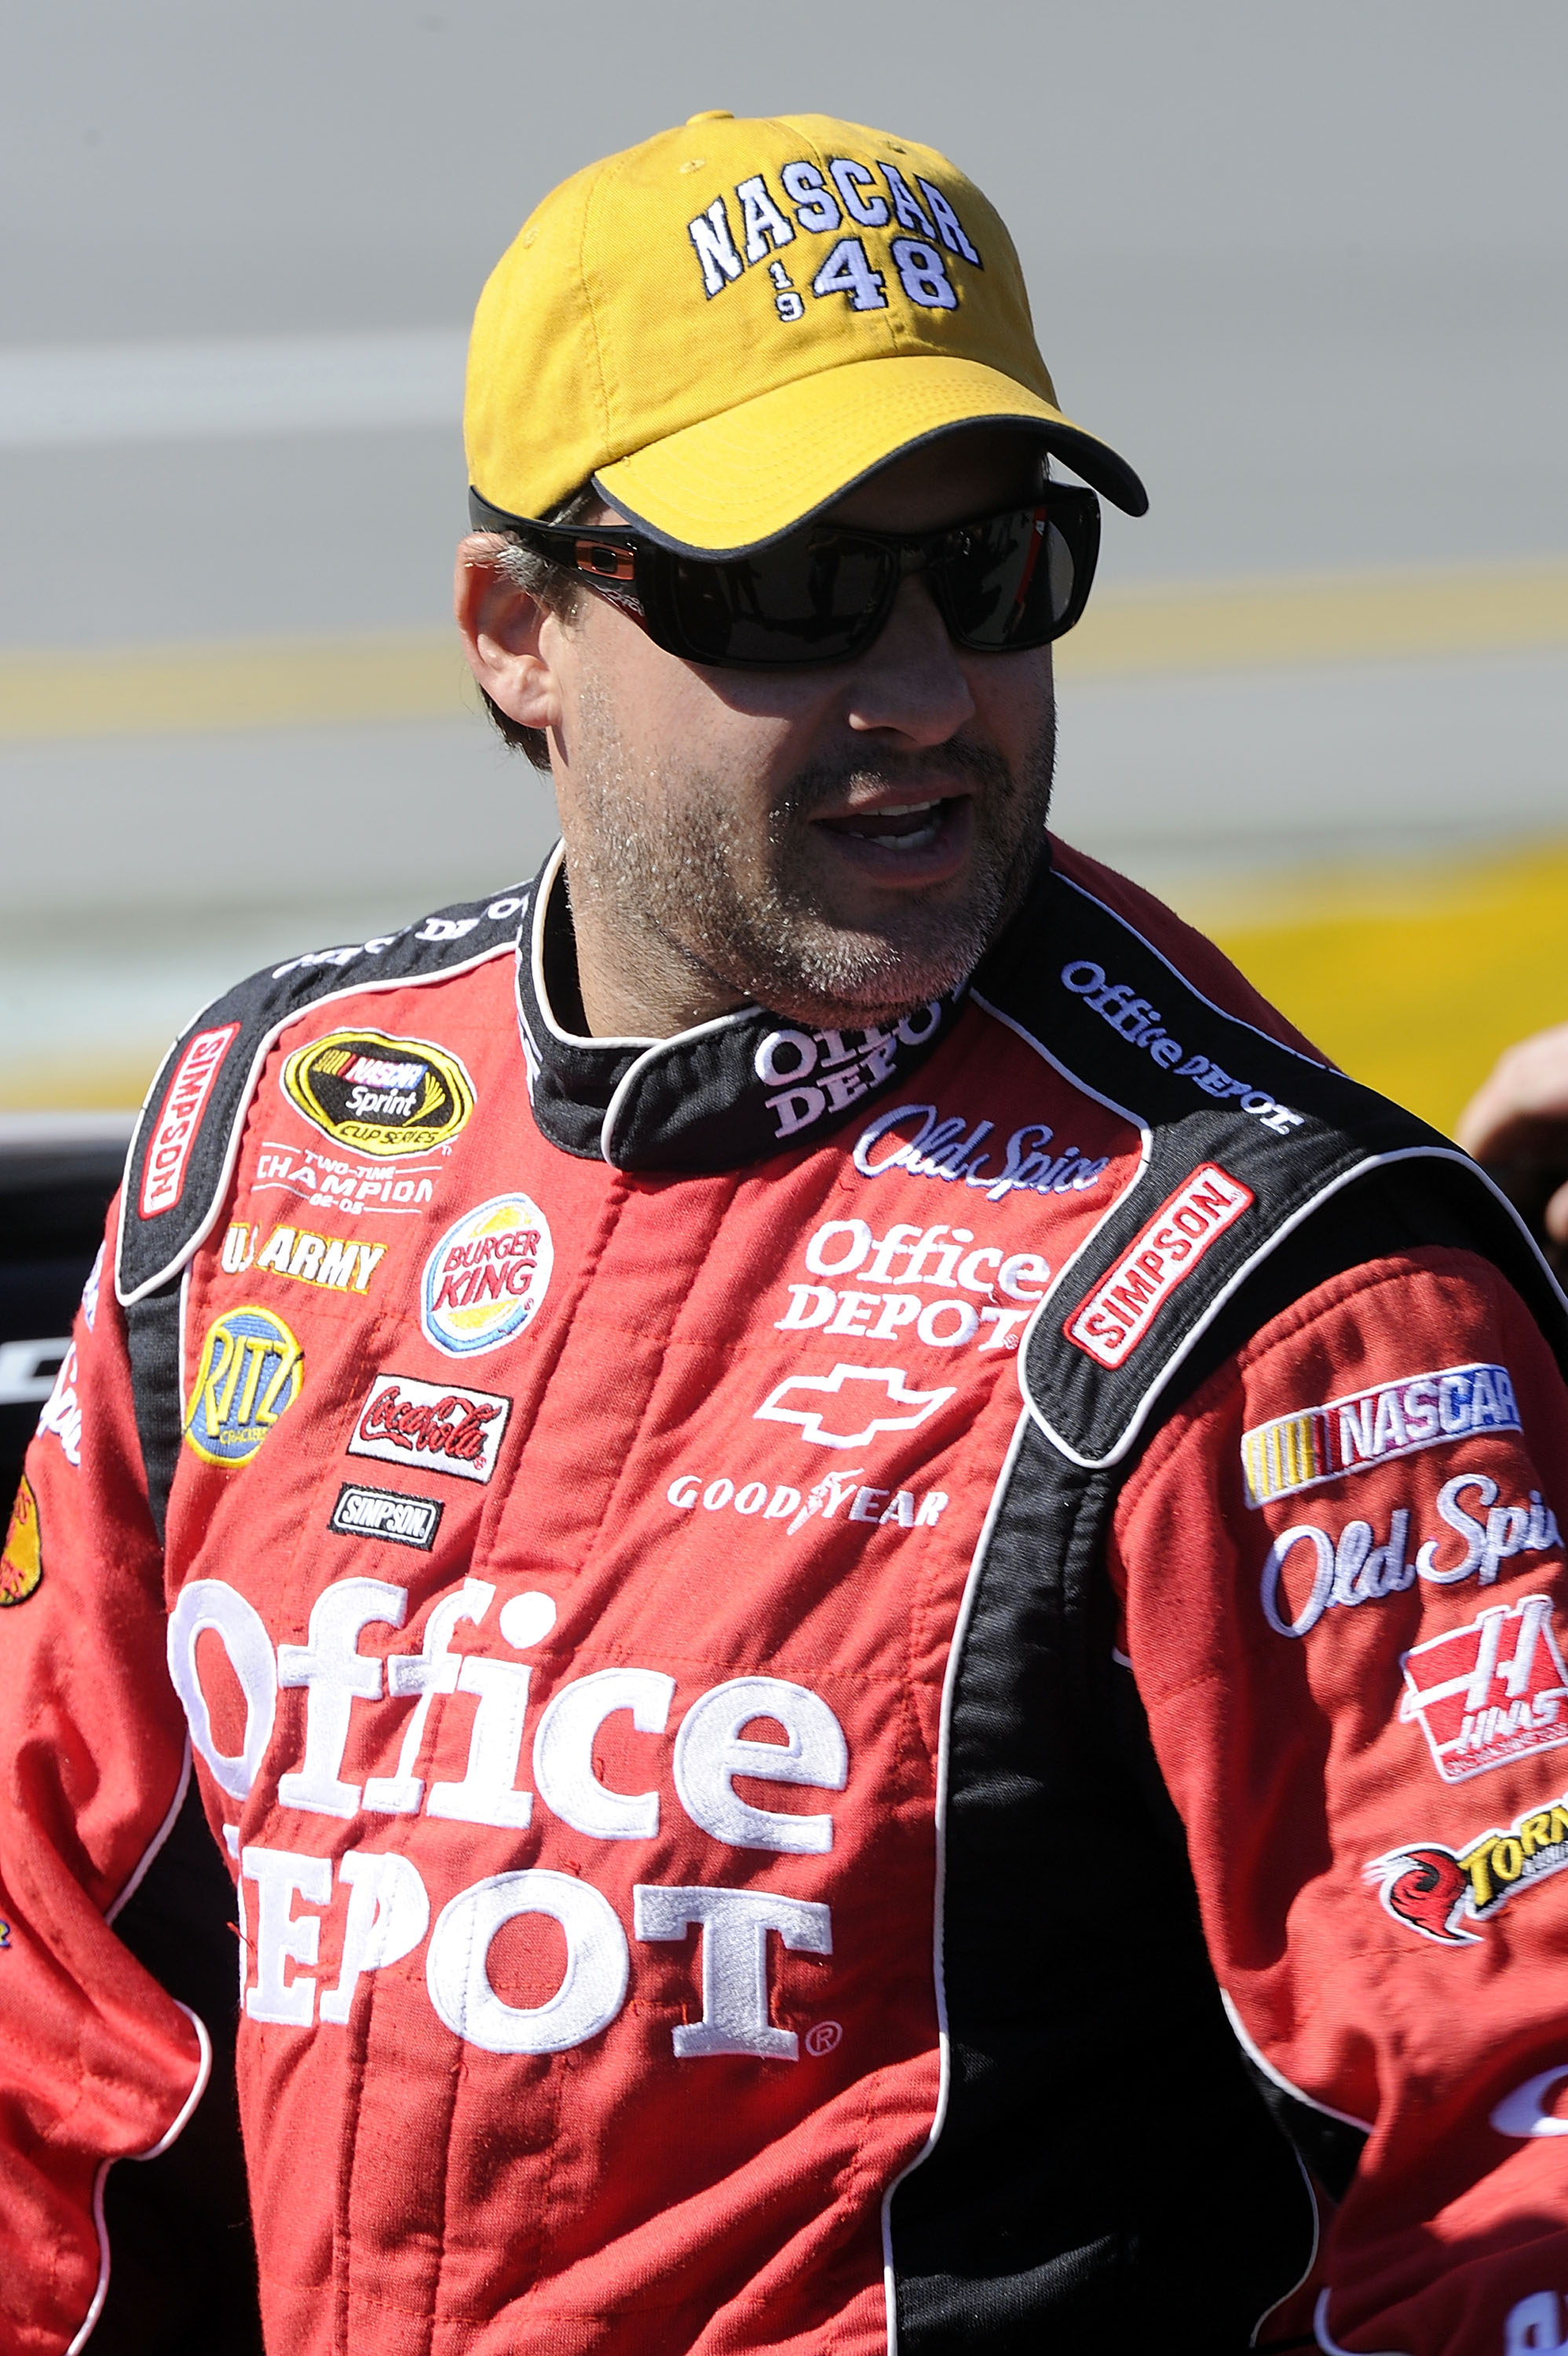 TALLADEGA, AL - OCTOBER 30:  Tony Stewart, driver of the #14 Old Spice/Office Depot Chevrolet, walks on the grid during qualifying for the NASCAR Sprint Cup Series AMP Energy Juice 500 at Talladega Superspeedway on October 30, 2010 in Talladega, Alabama.